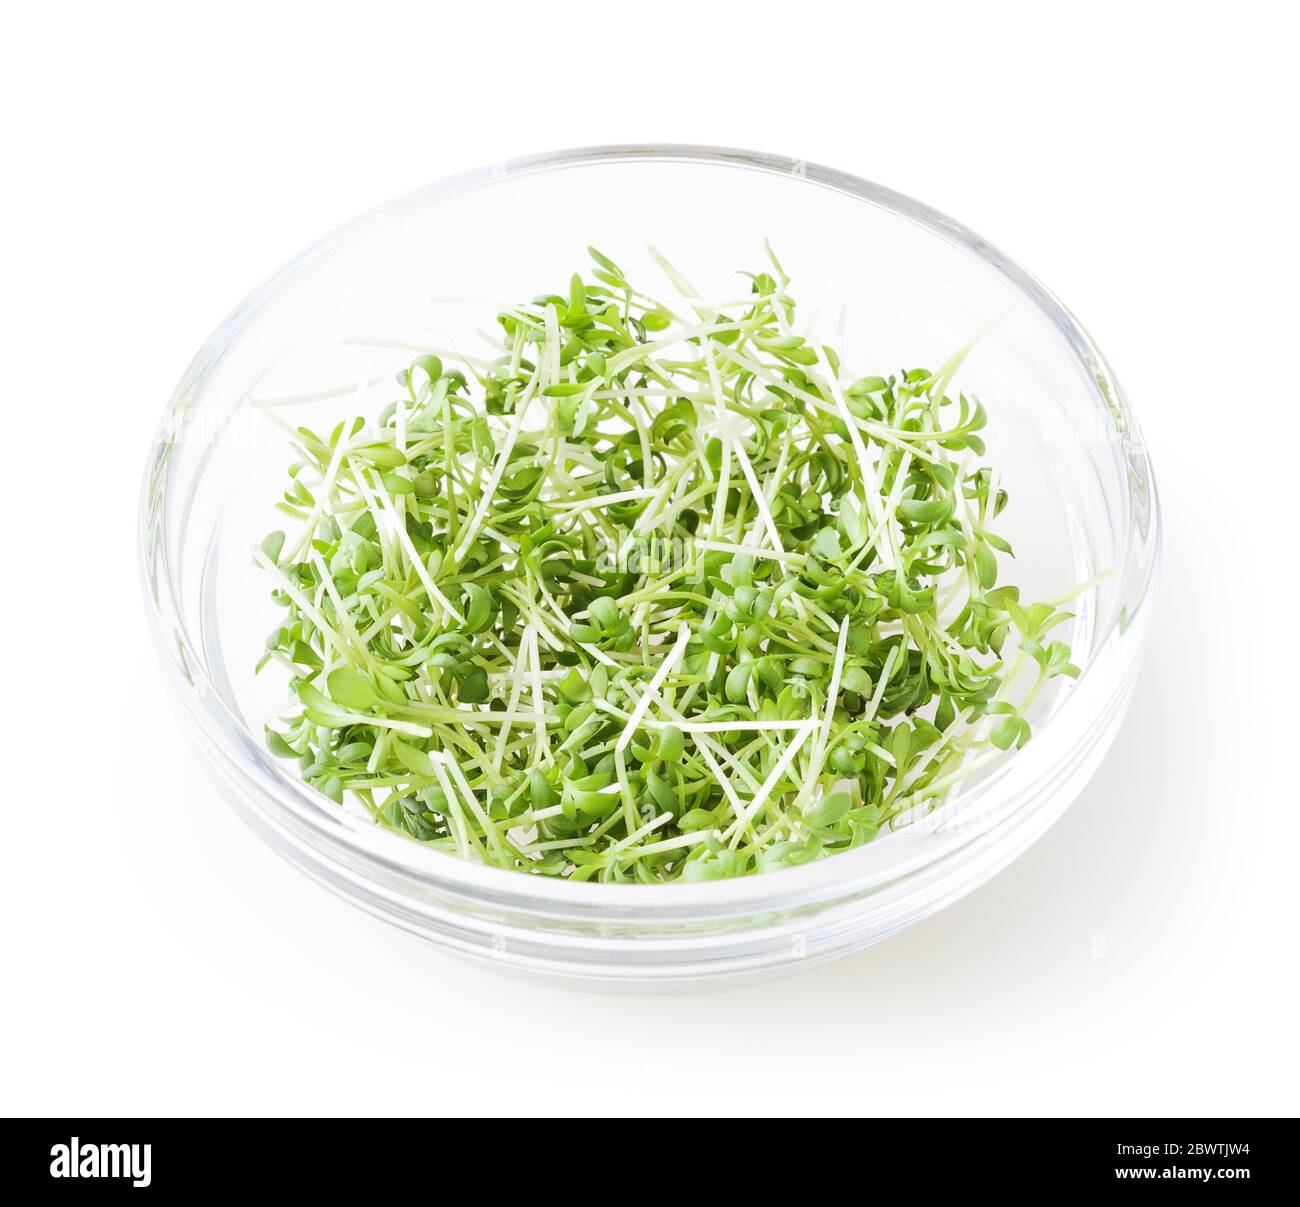 micro greens garden cress sprouts in glass bowl isolated on white background with clipping path Stock Photo